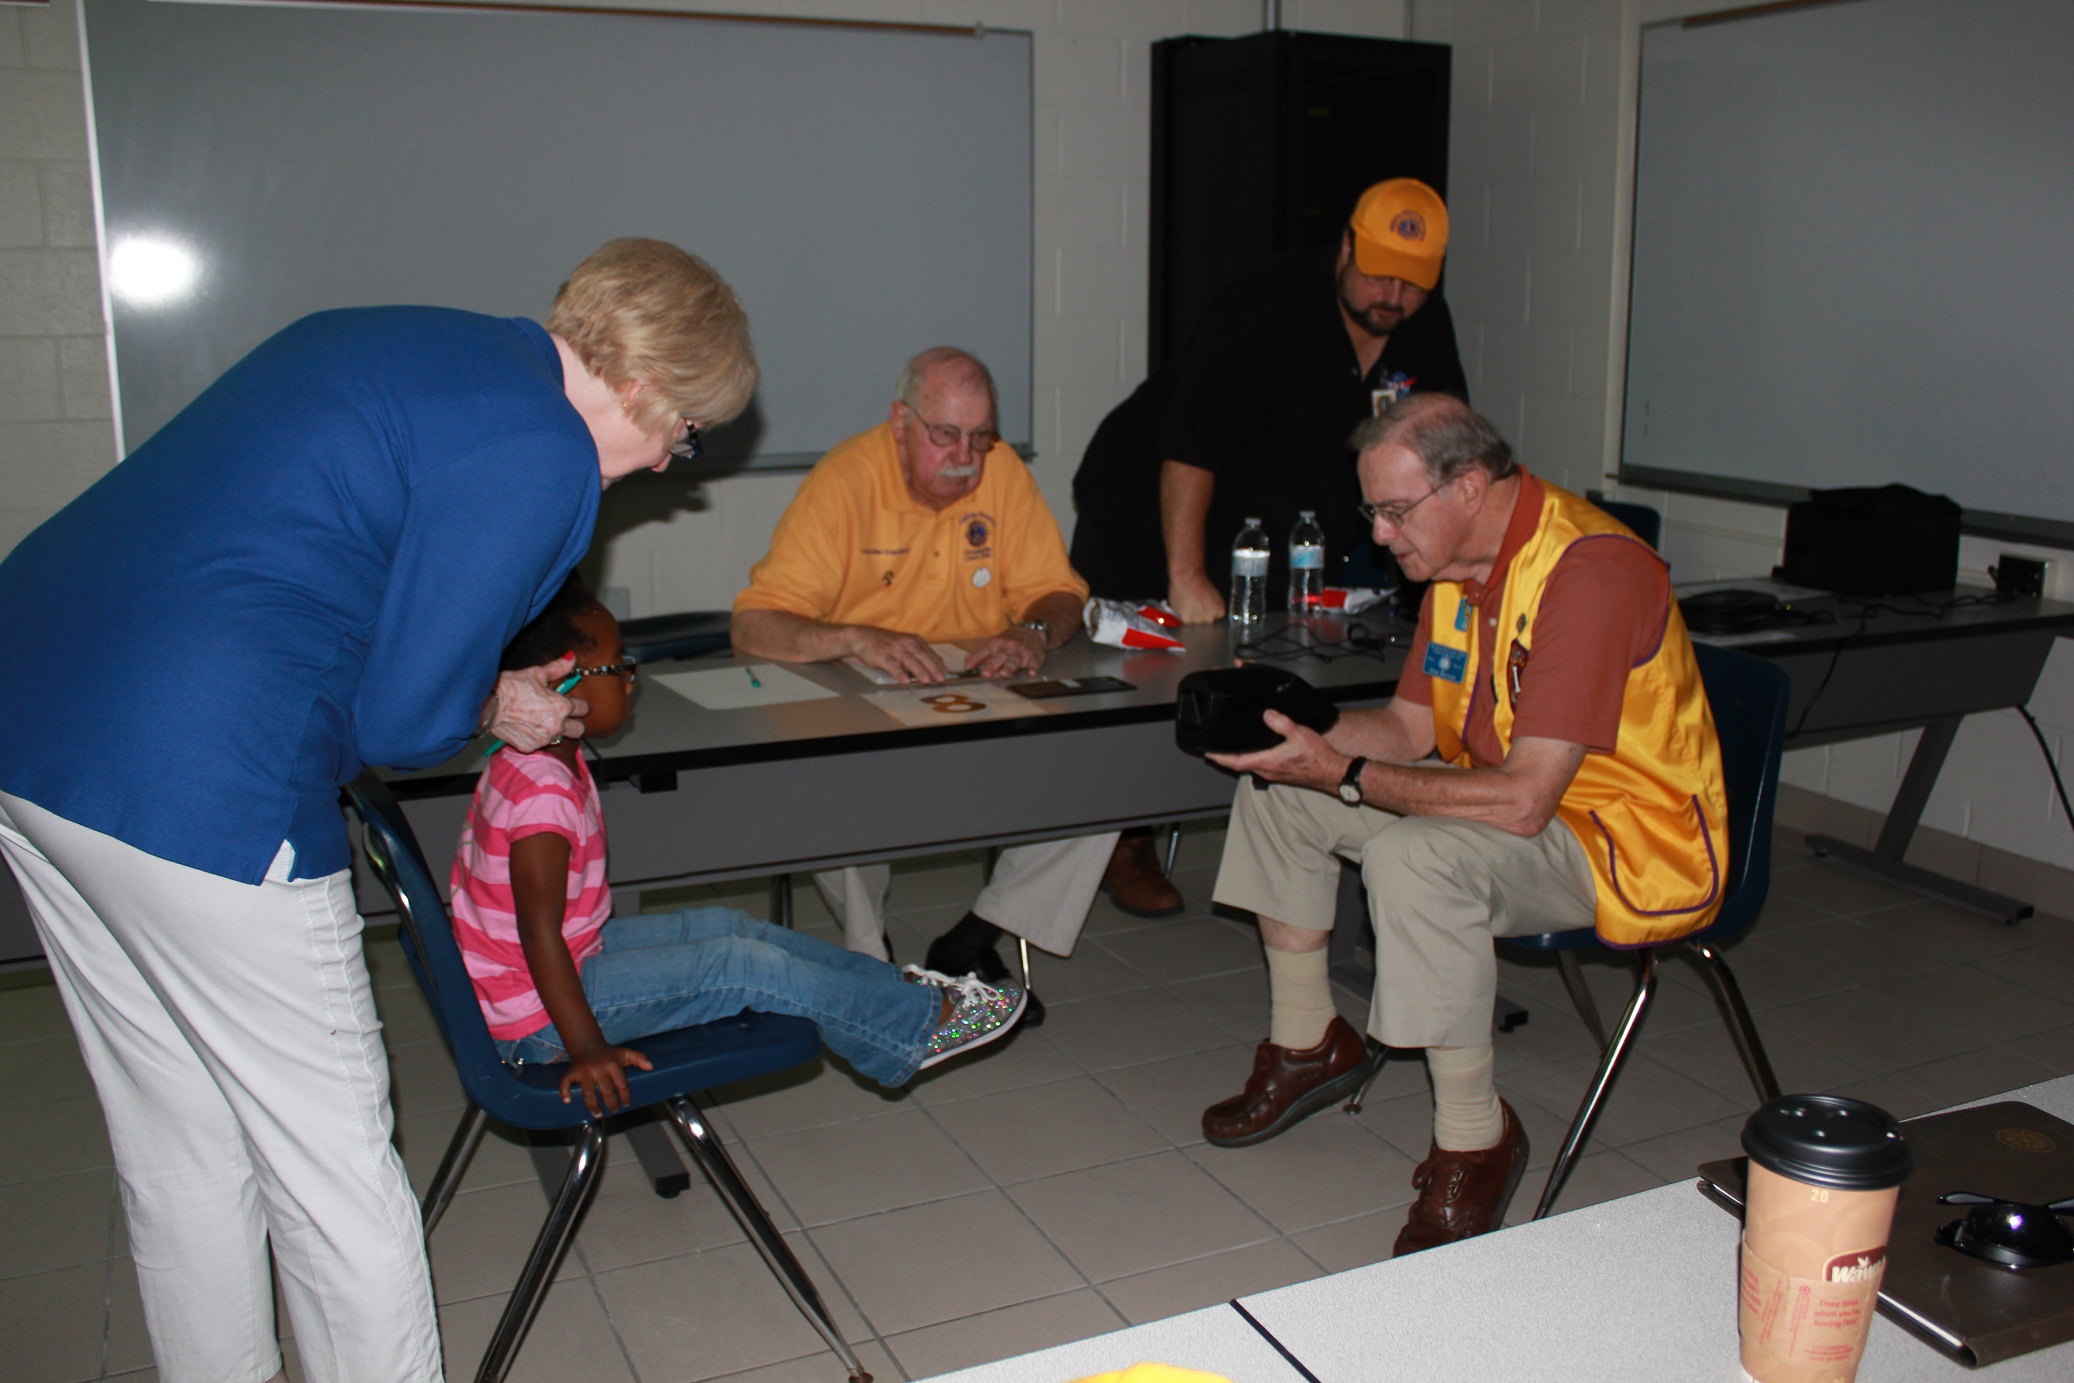 Lions James “Jim” Palacio, Jr., John Cranford and Don Beuson administer a vision test and help Marquesa W. to adjust her glasses to be sure they get an accurate reading.